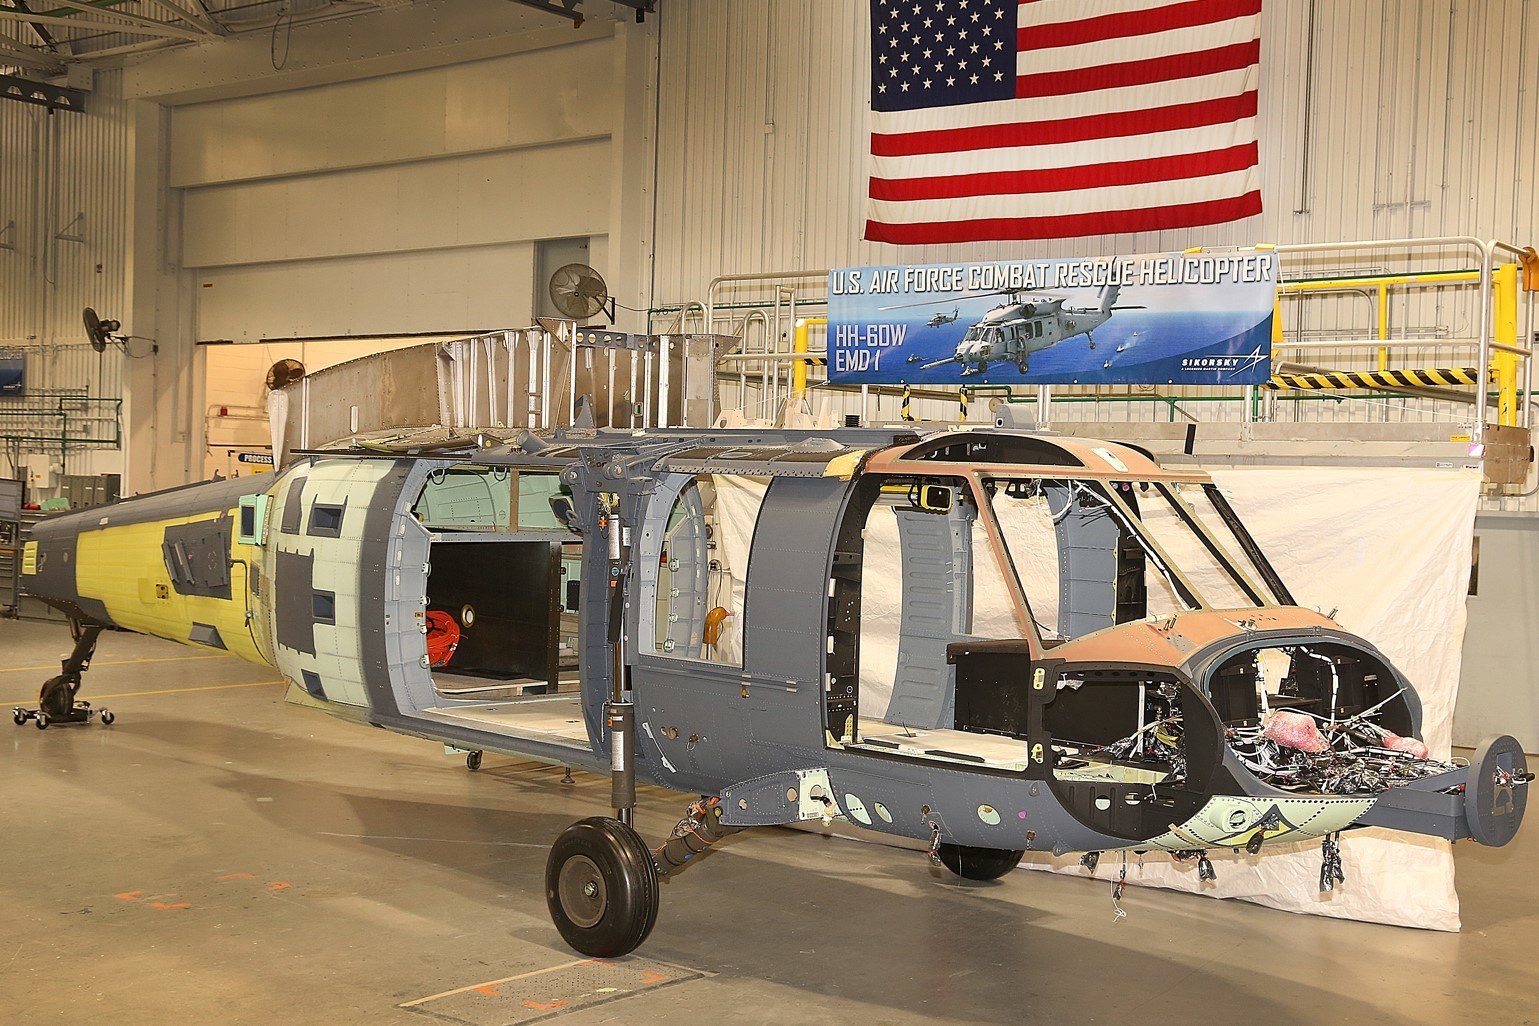 The first Sikorsky HH-60W Combat Rescue Helicopter as it enters final assembly at Stratford, Connecticut. The timing of final assembly supports the program’s accelerated schedule and positions the aircraft’s first flight for the end of this year, two months ahead of schedule. Sikorsky Photo